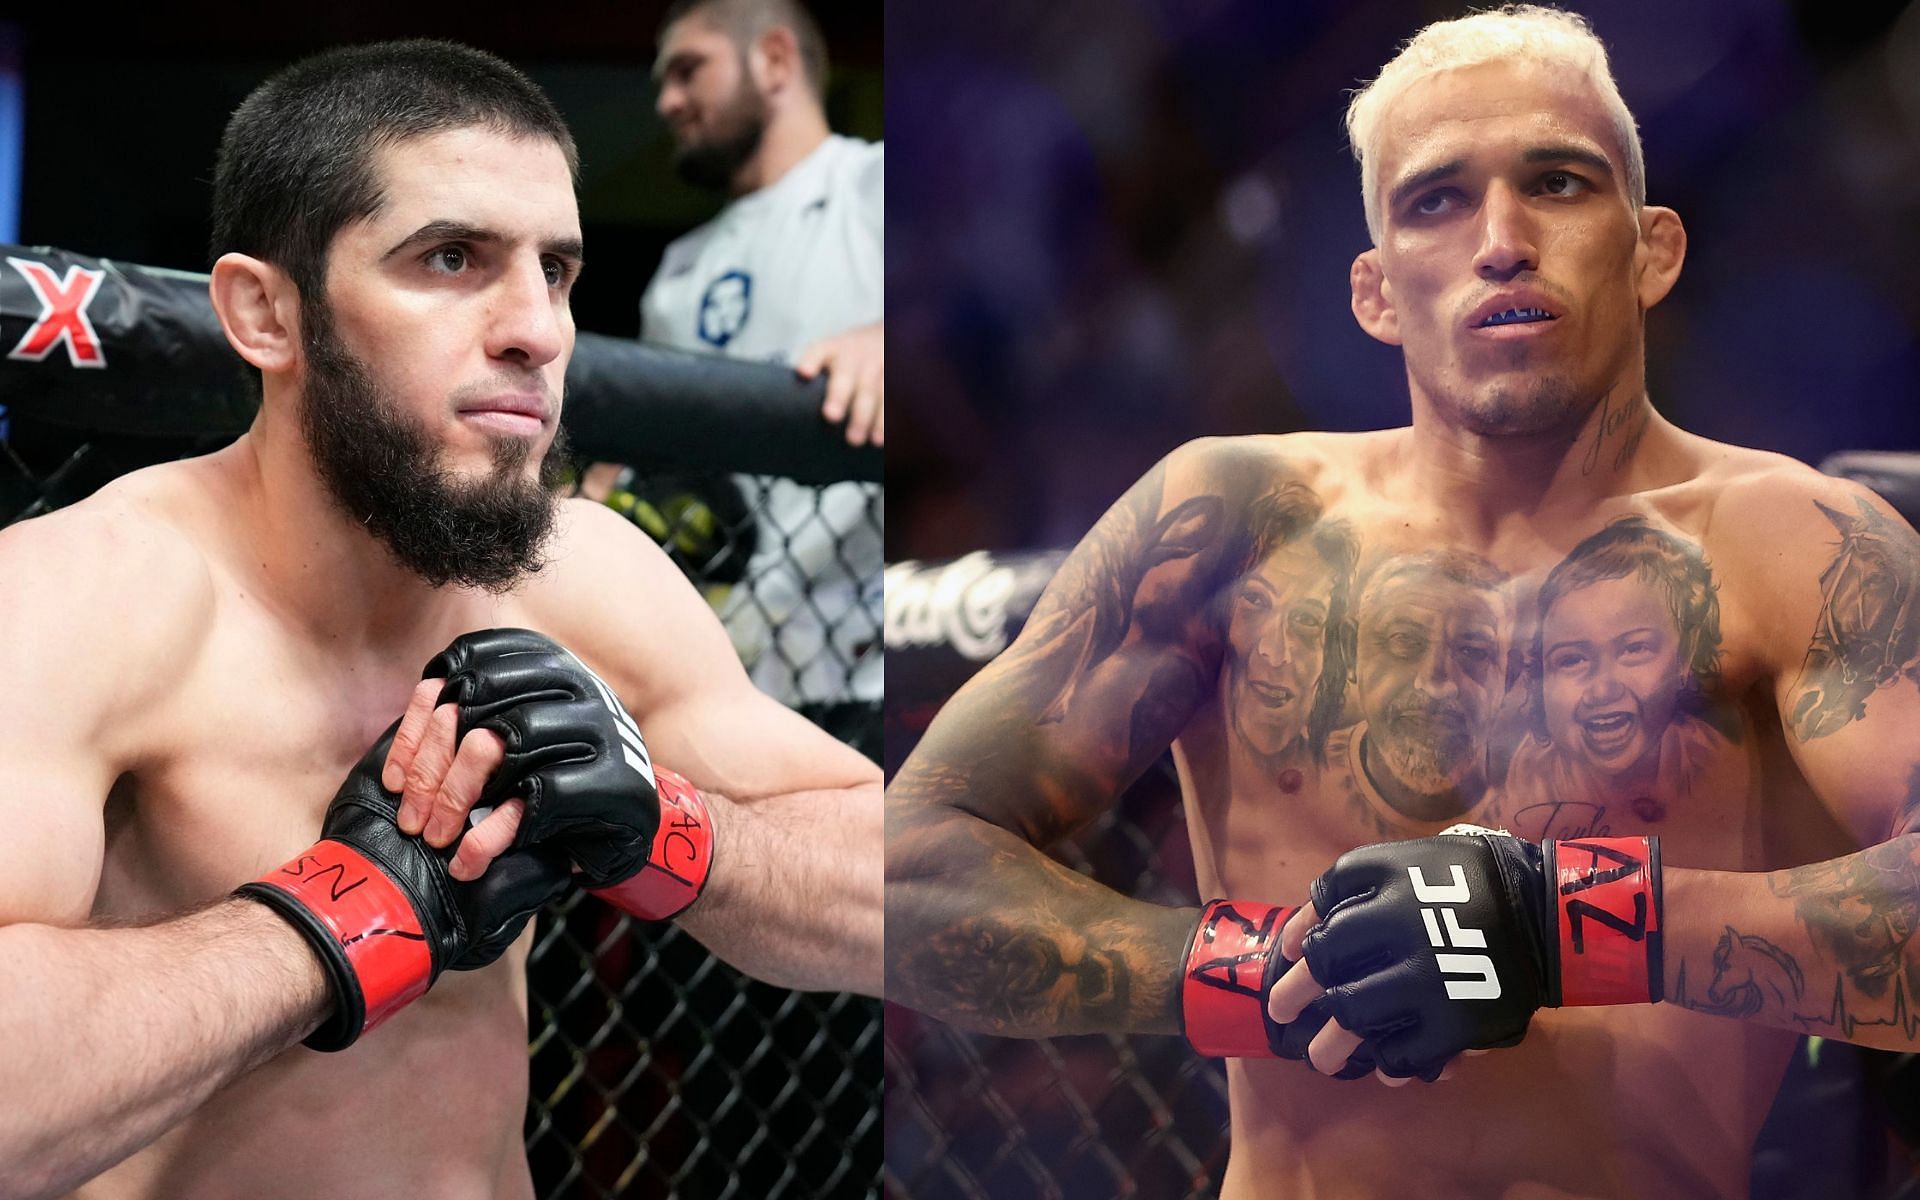 Islam Makhachev (left) and Charles Oliveira (right). [Images courtesy: left image from Chris Unger/Zuffa LLC and right image from Getty Images]